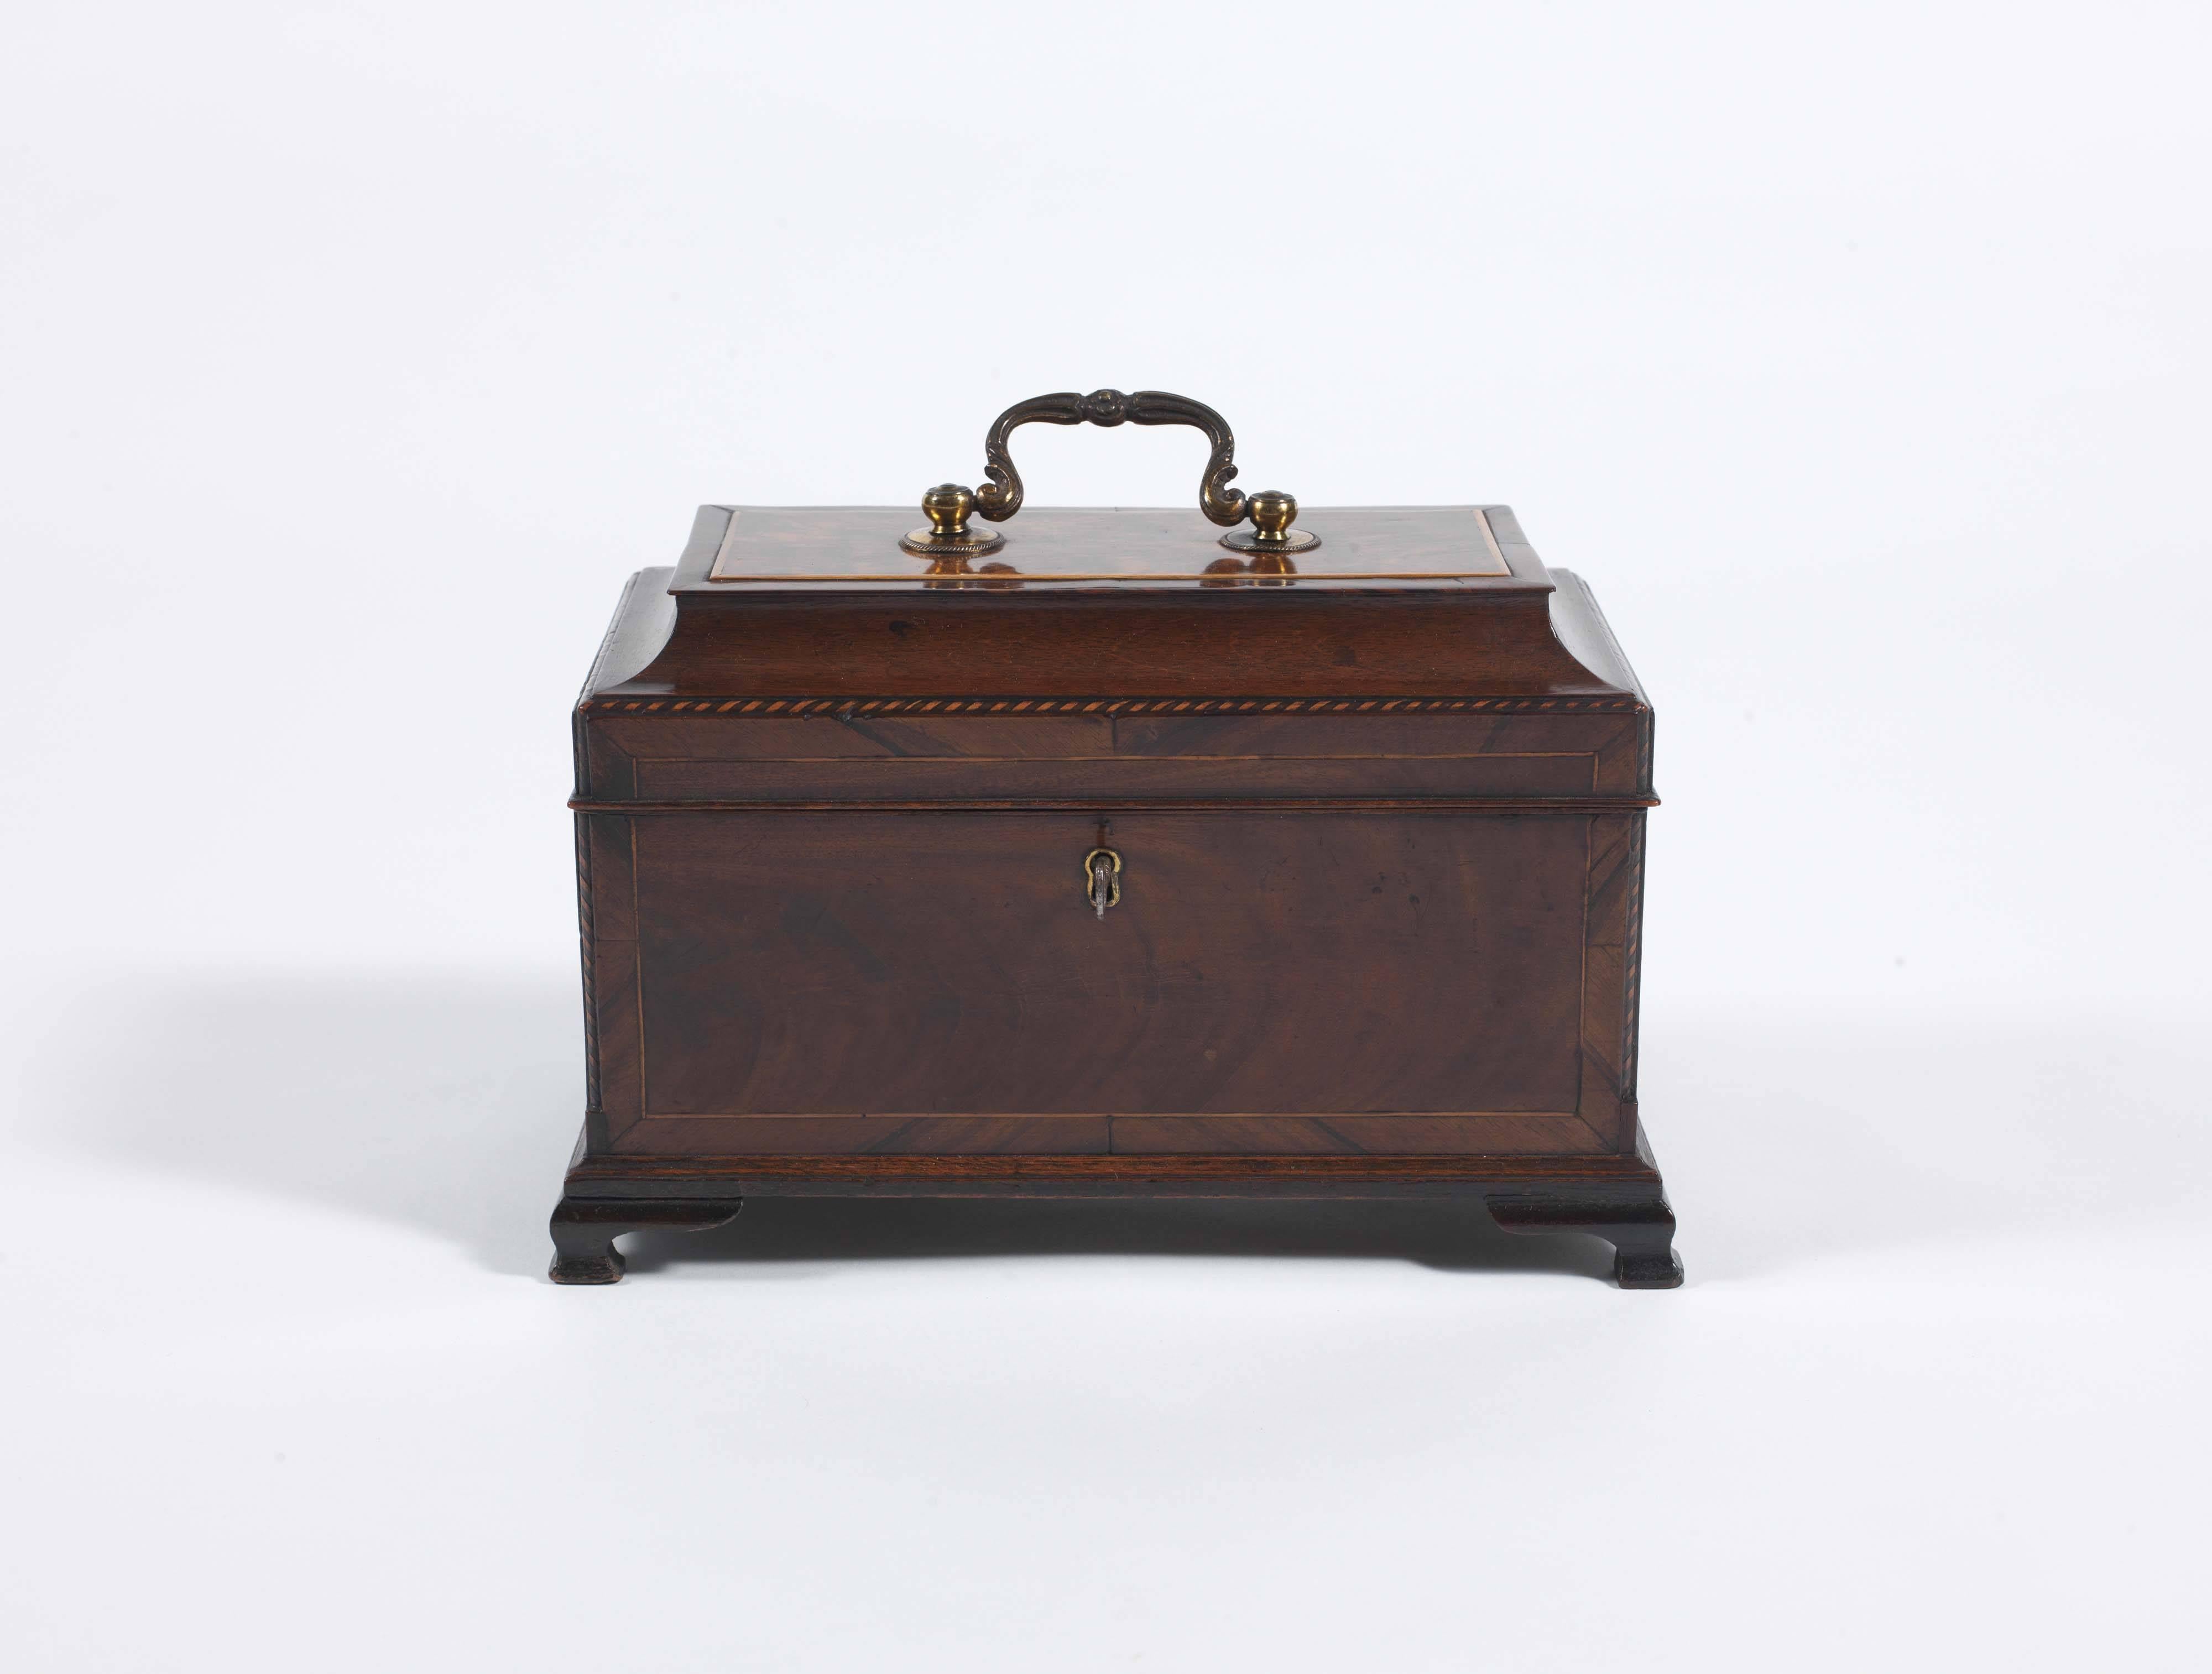 A splendid example with its original gilt metal decorative swan neck handle on moulded hinged lid; the canted corners with boxwood and ebony feathered inlay, the caddy with boxwood stringing, standing on wonderful ogee bracket feet. The interior